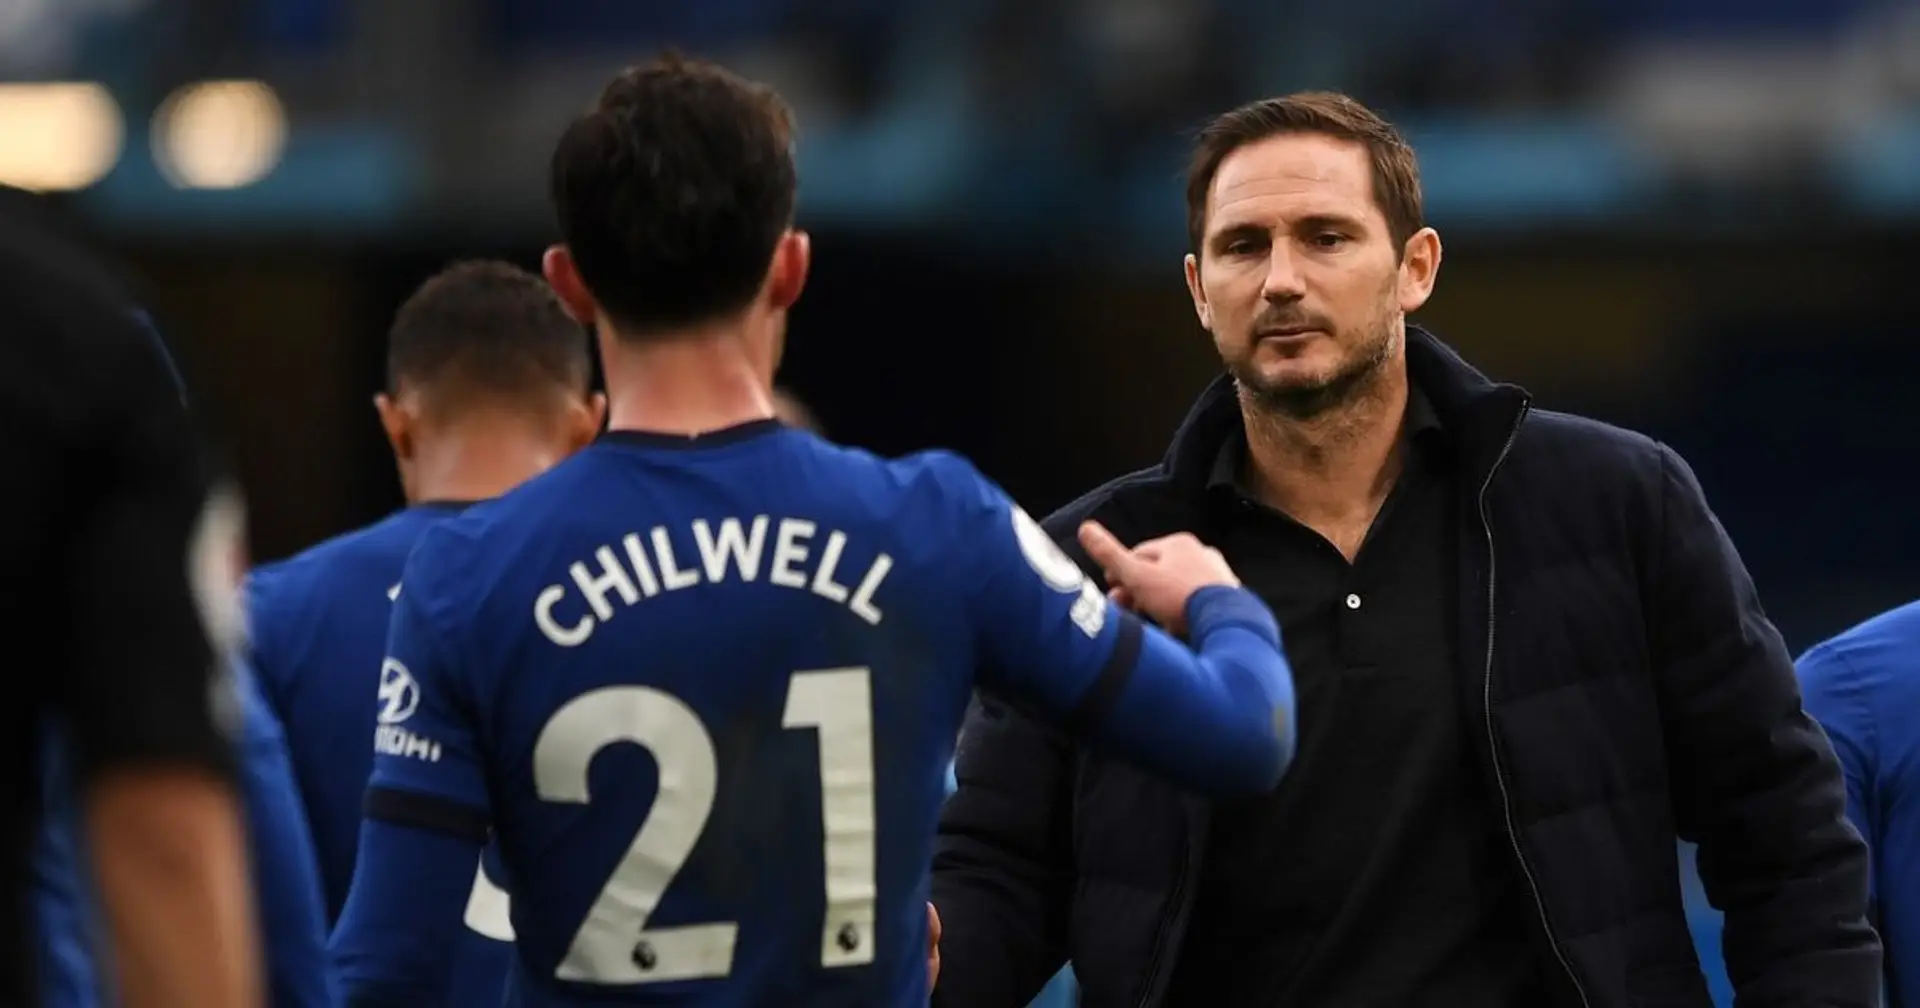 Of all summer signings, only Chilwell was a Lampard target: The Athletic